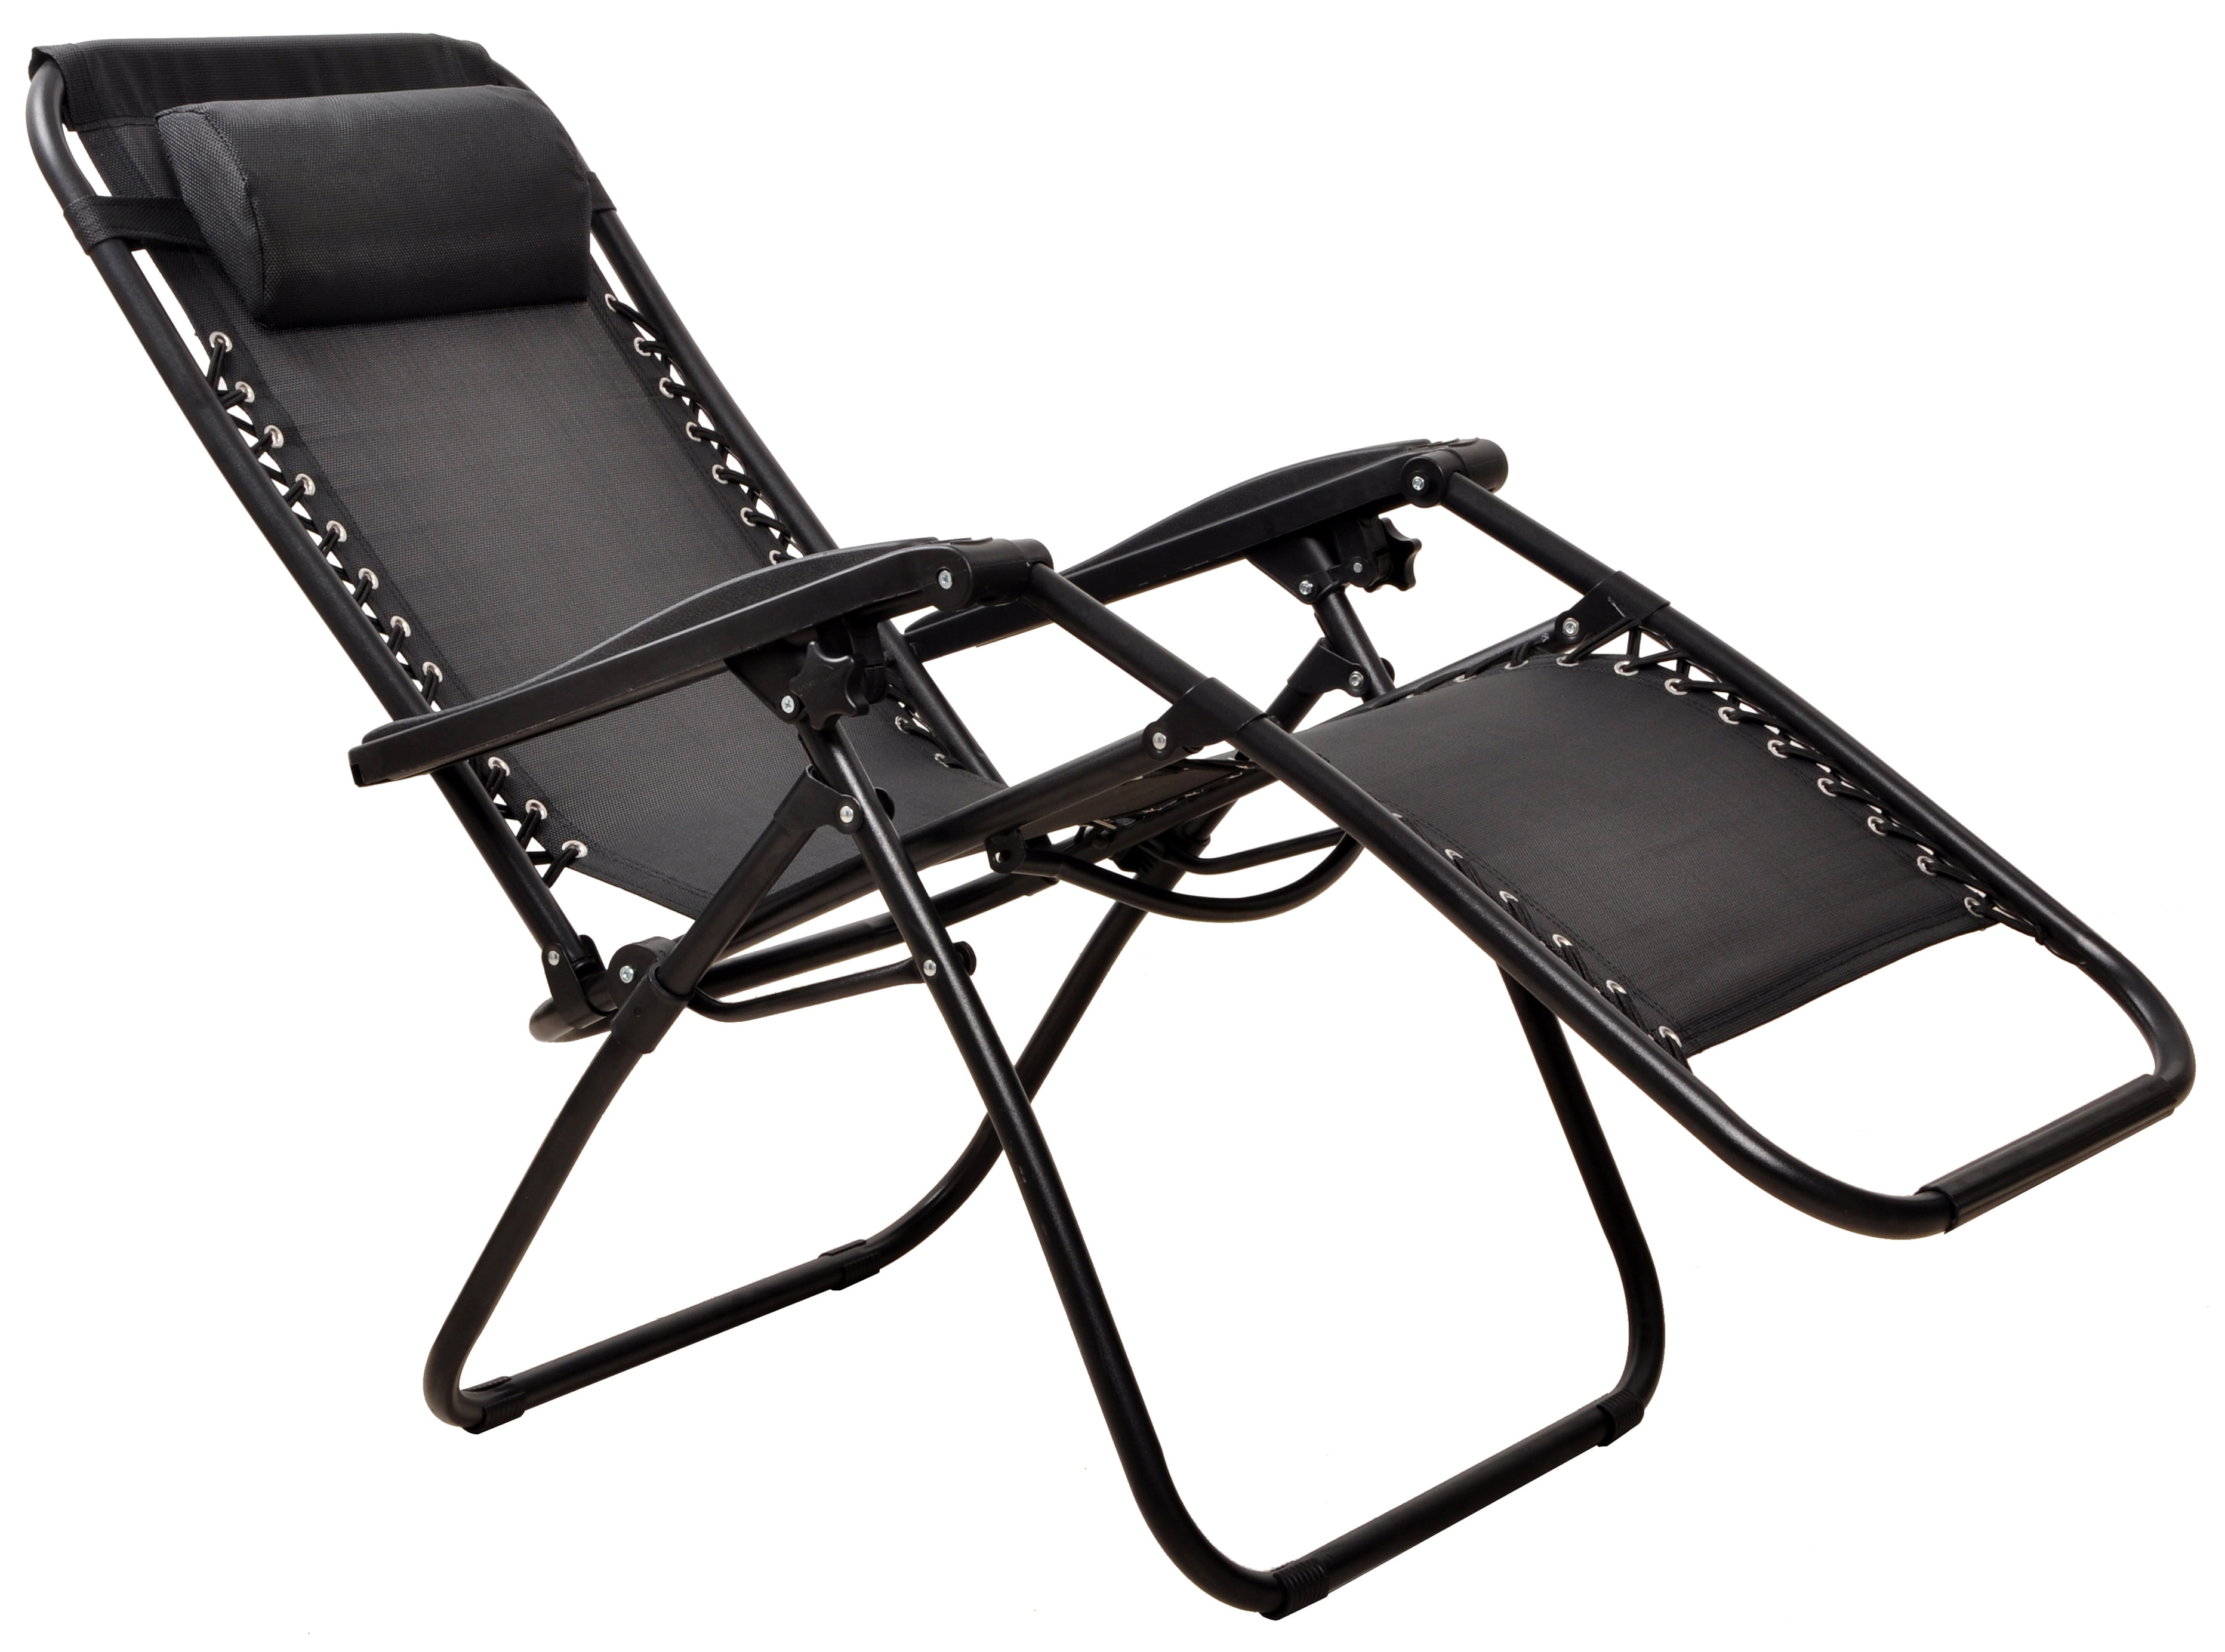 Everyday Essentials Adjustable Zero Gravity Lounge Chair Recliners for